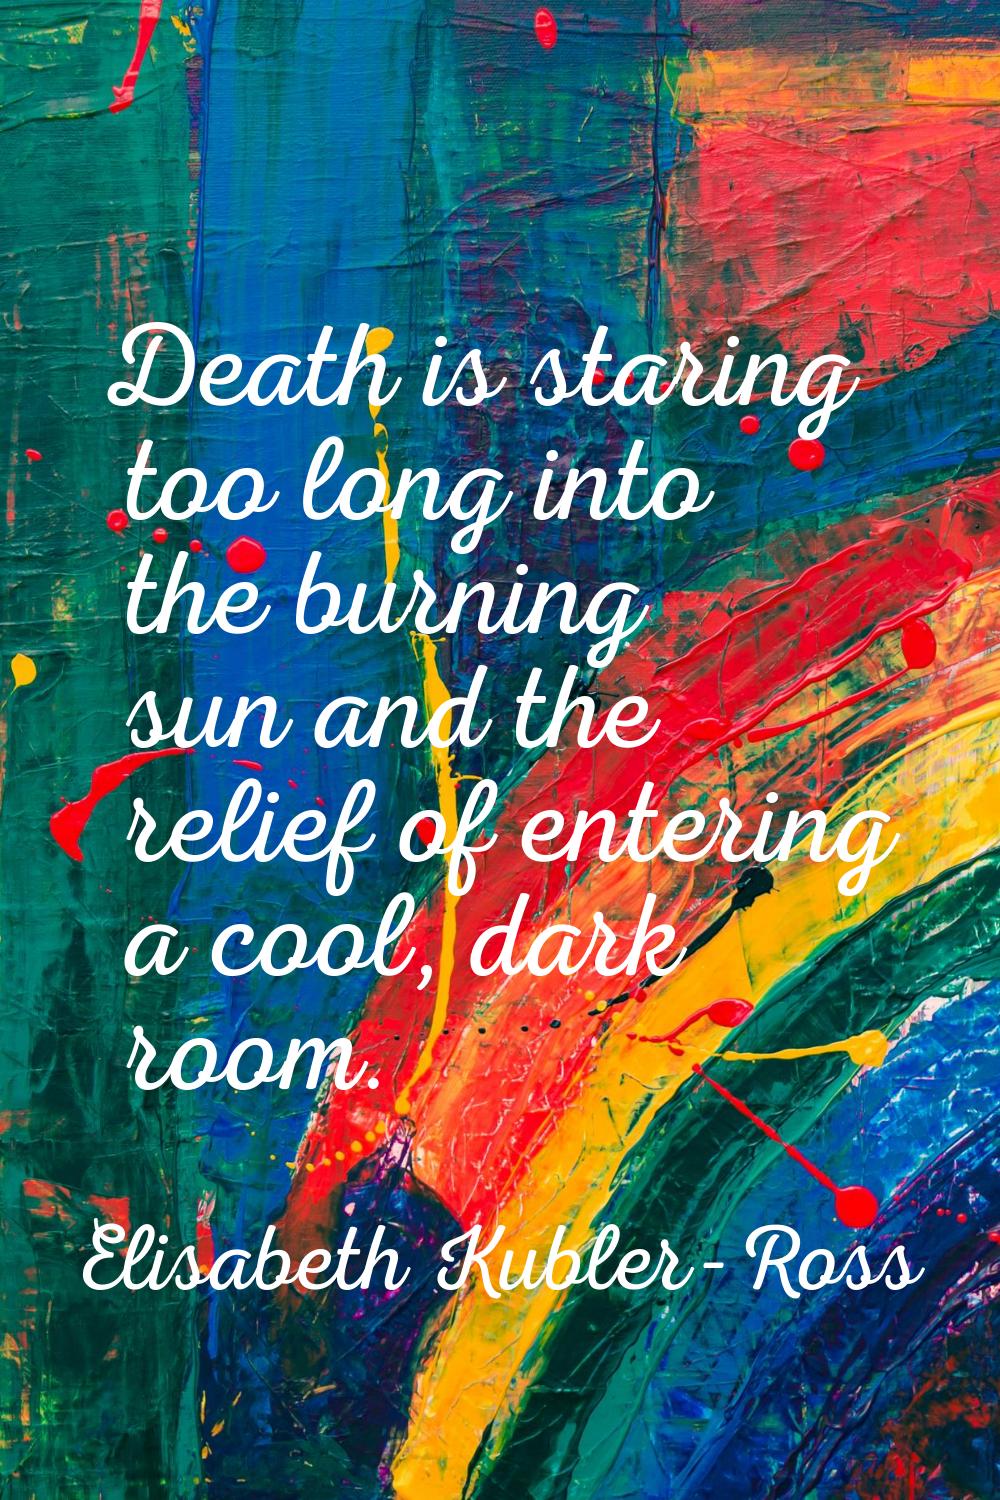 Death is staring too long into the burning sun and the relief of entering a cool, dark room.